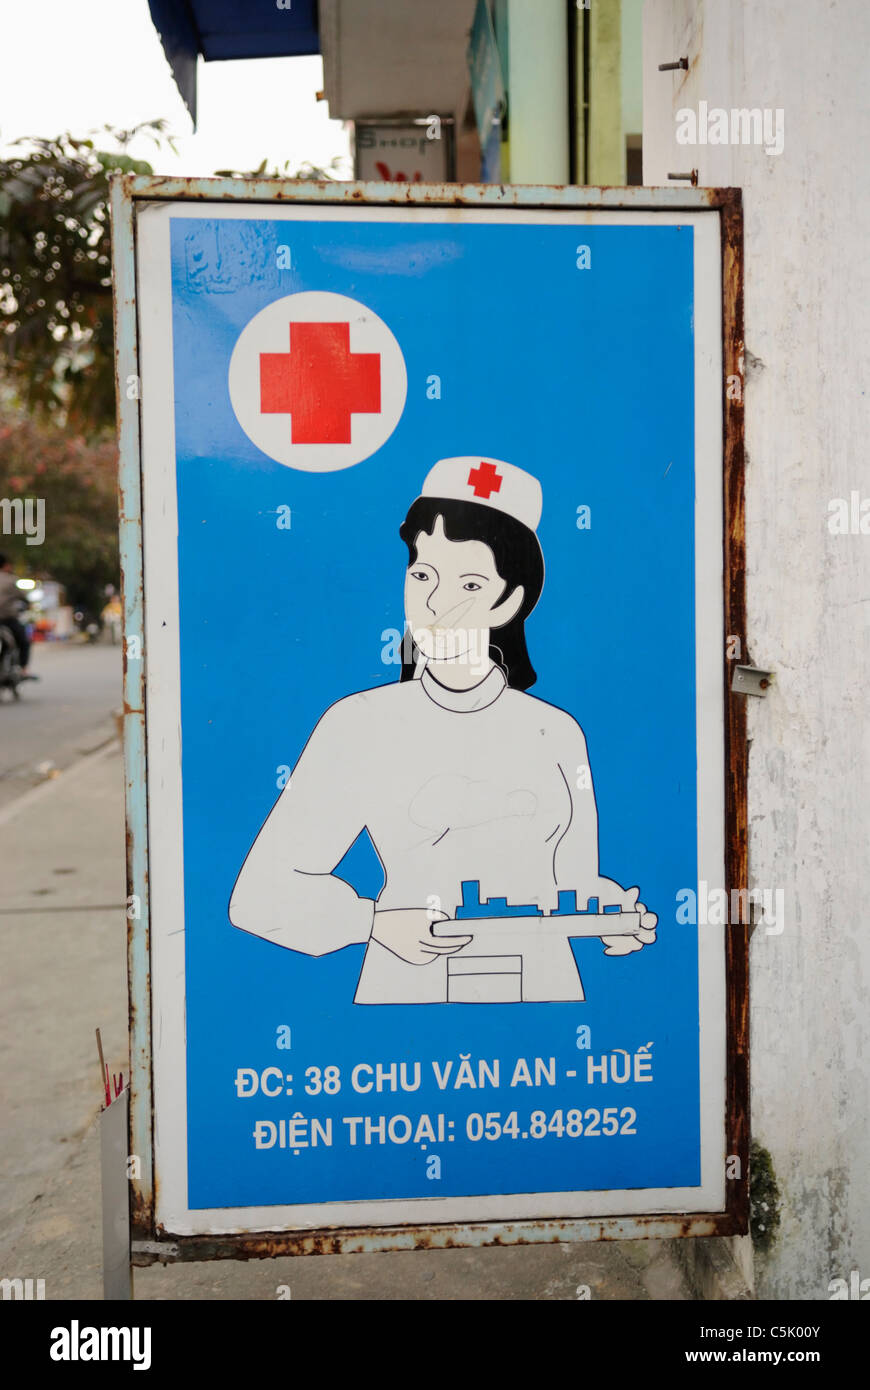 Asia, Vietnam, Hue. Advertisement for medical services. Stock Photo